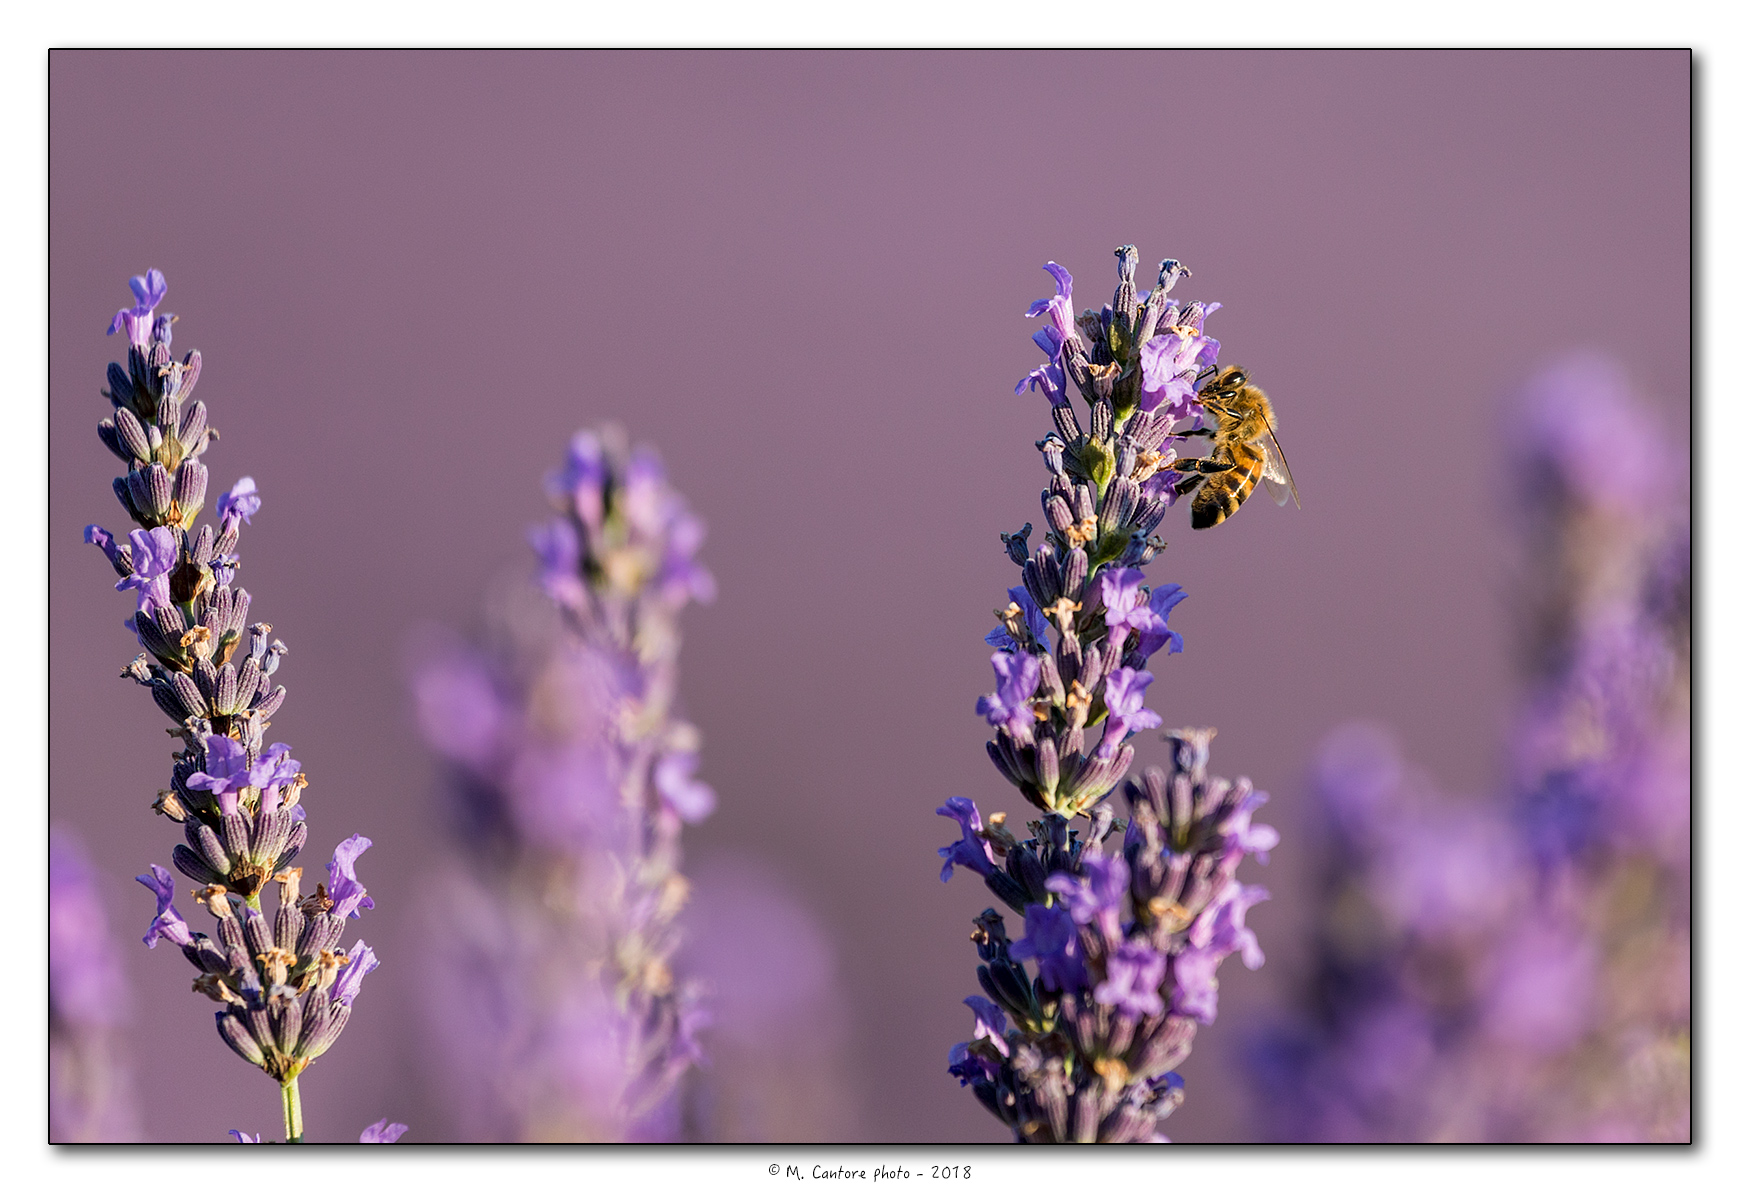 Bees and lavender, an indissoluble binomial...